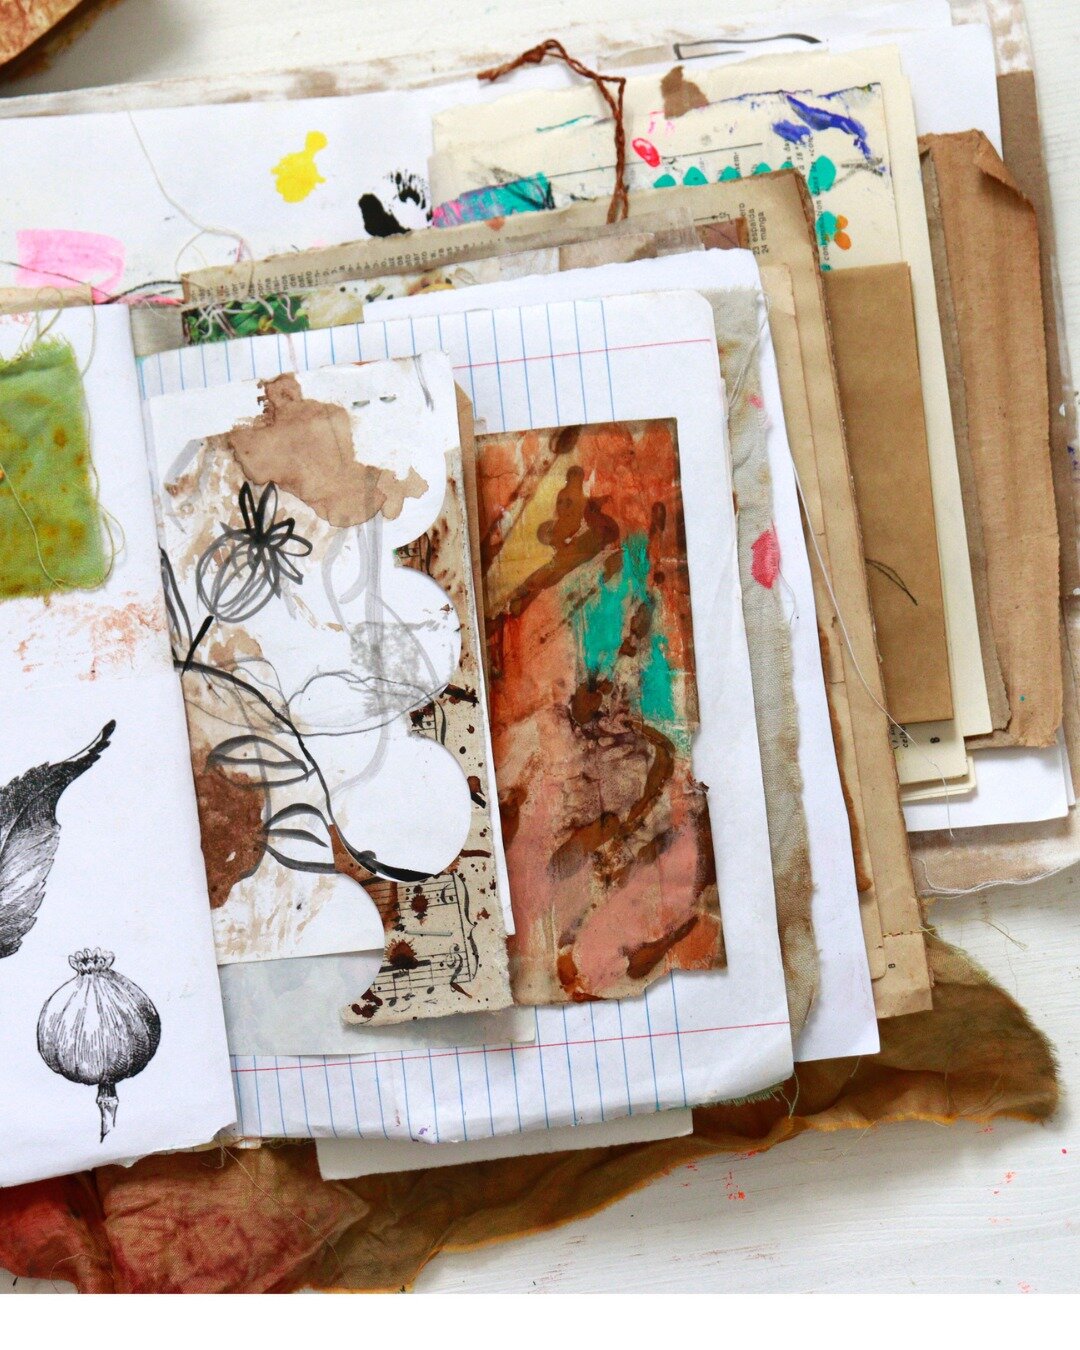 Let inspiration guide you through this FREE COURSE✨ Collect the pieces that ignite your creative spark💖

FRAGMENTS is a complimentary art class tailored for mixed media enthusiasts😍
Craft an art journal filled with the fragments that fuel your insp